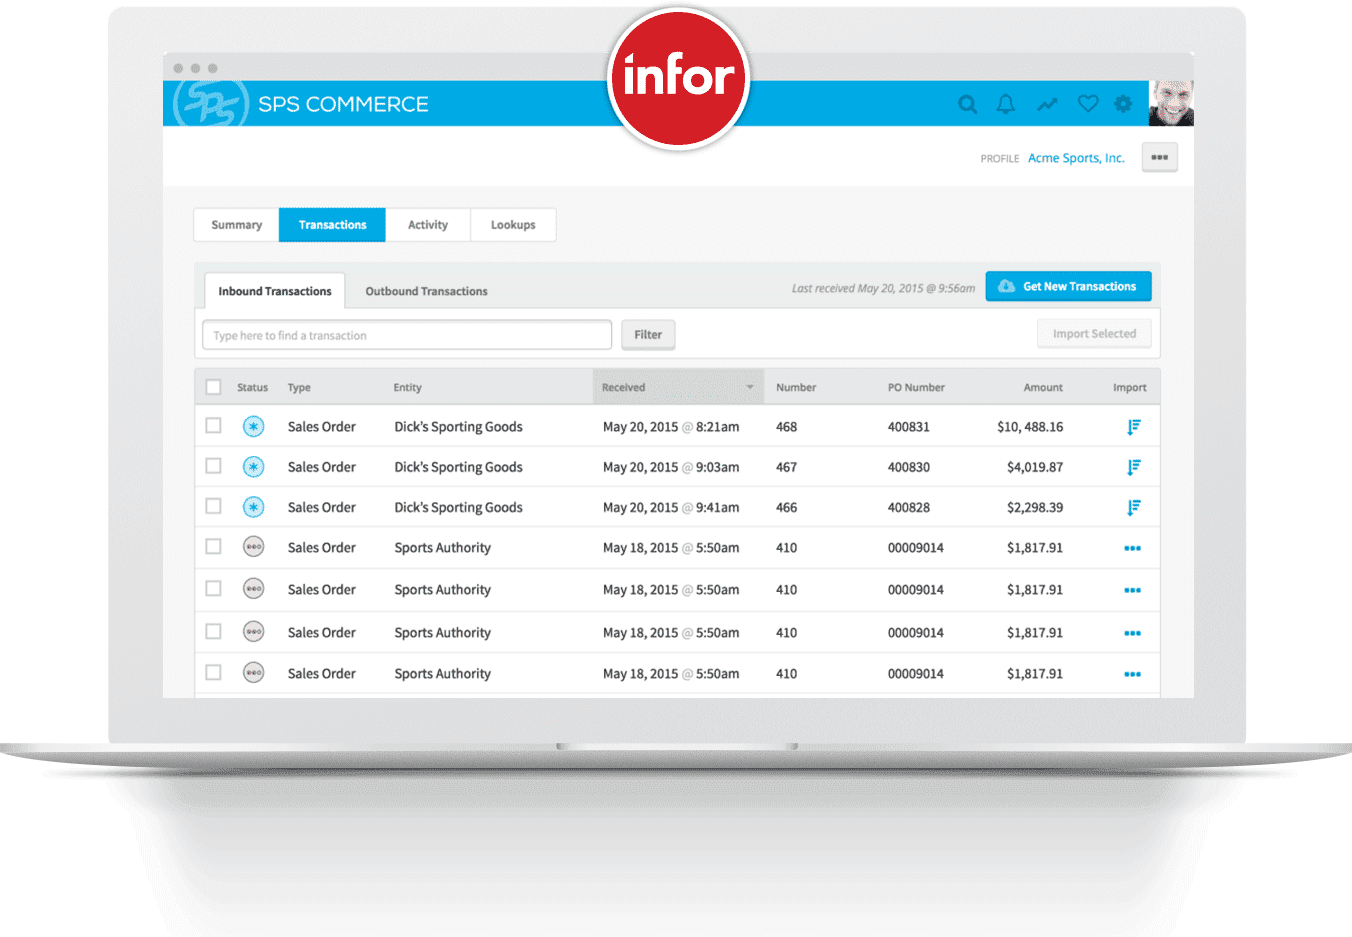 Infor EDI Software from SPS Commerce is completely integrated.